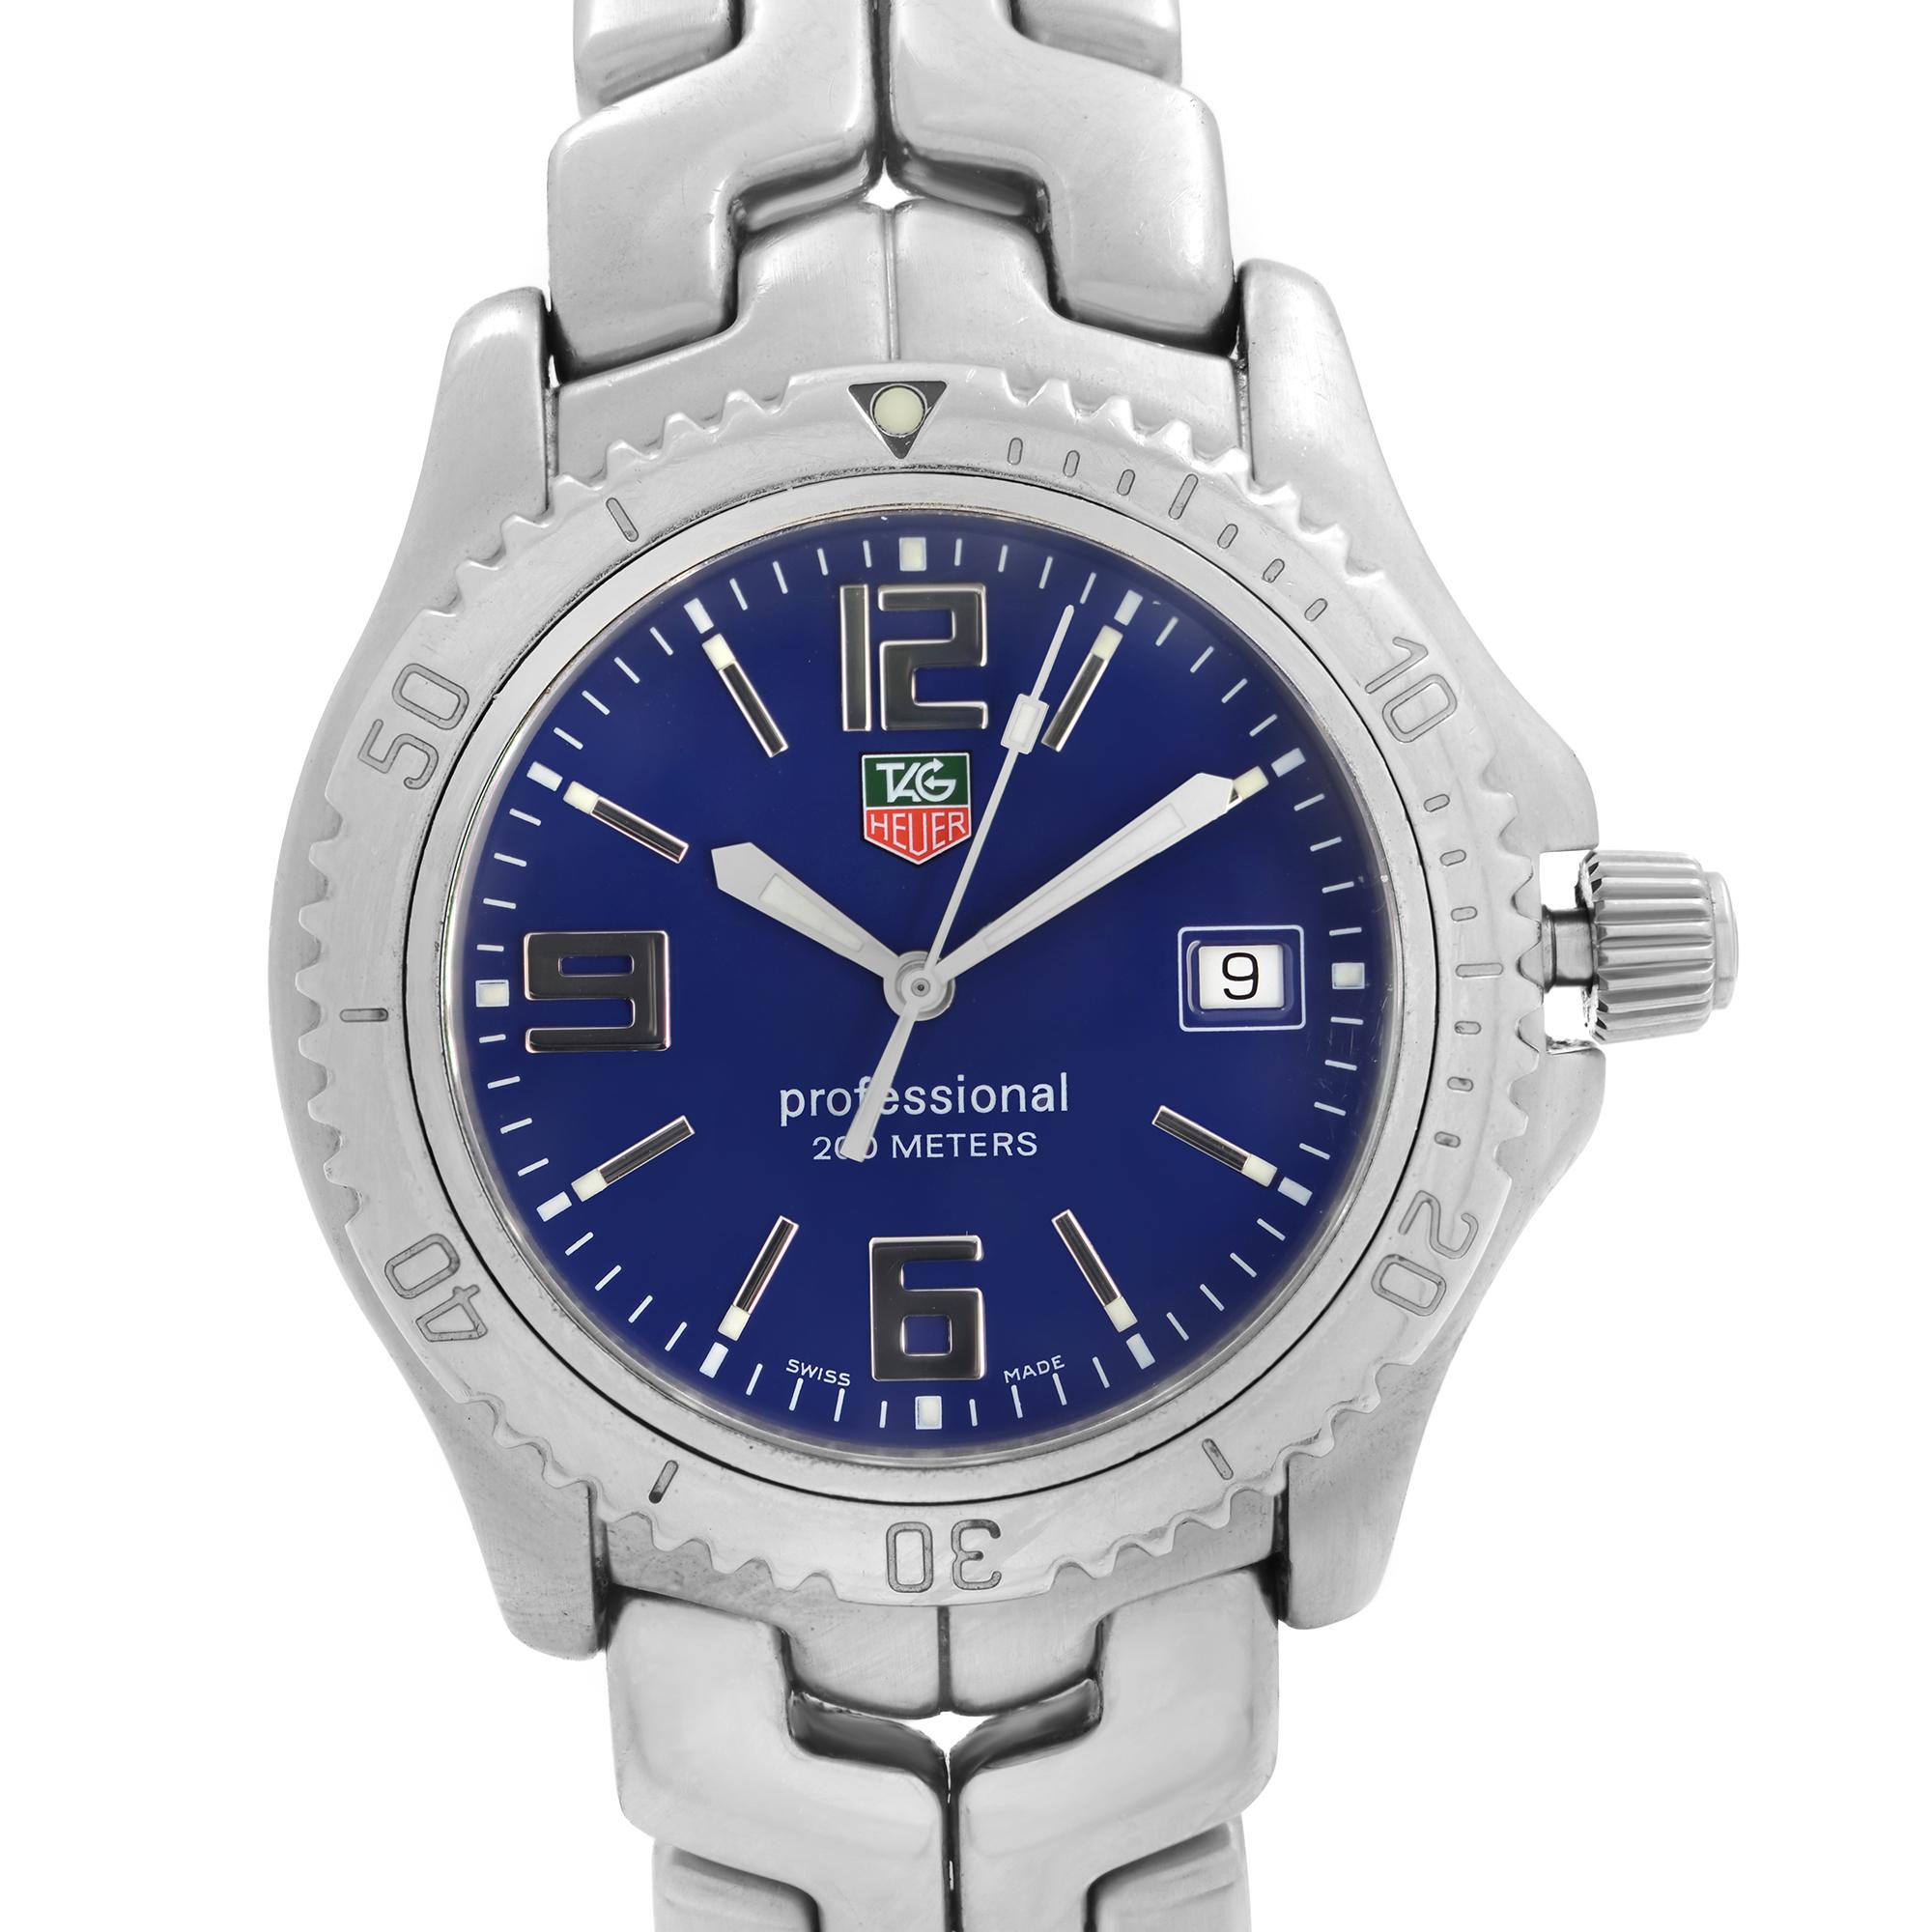 Pre-owned Tag Heuer Link Stainless Steel 200m Professional Blue Dial Quartz Men's Watch WT1113.BA0551. This Timepiece is powered by a Quartz Movement and Features: Stainless Steel Round Case and Bracelet. Uni-Directional Rotating Steel Bezel. Blue